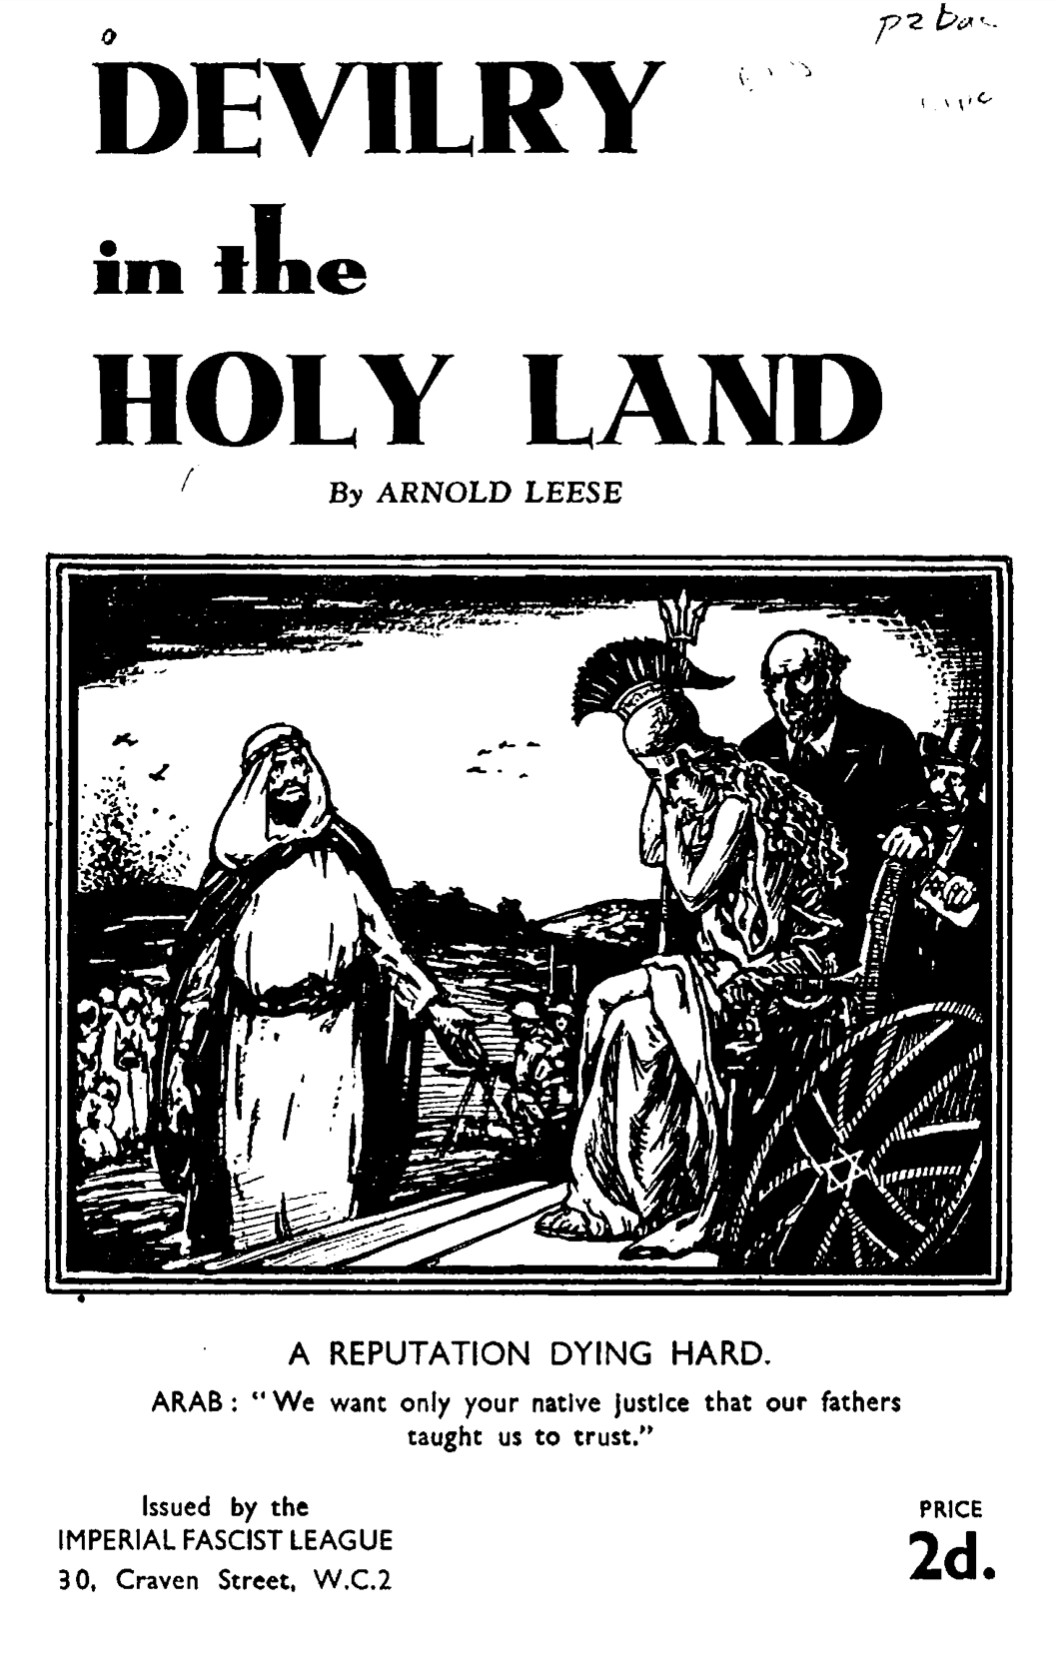 Devilry in the  Holy Land (1938) by Arnold Spencer Leese